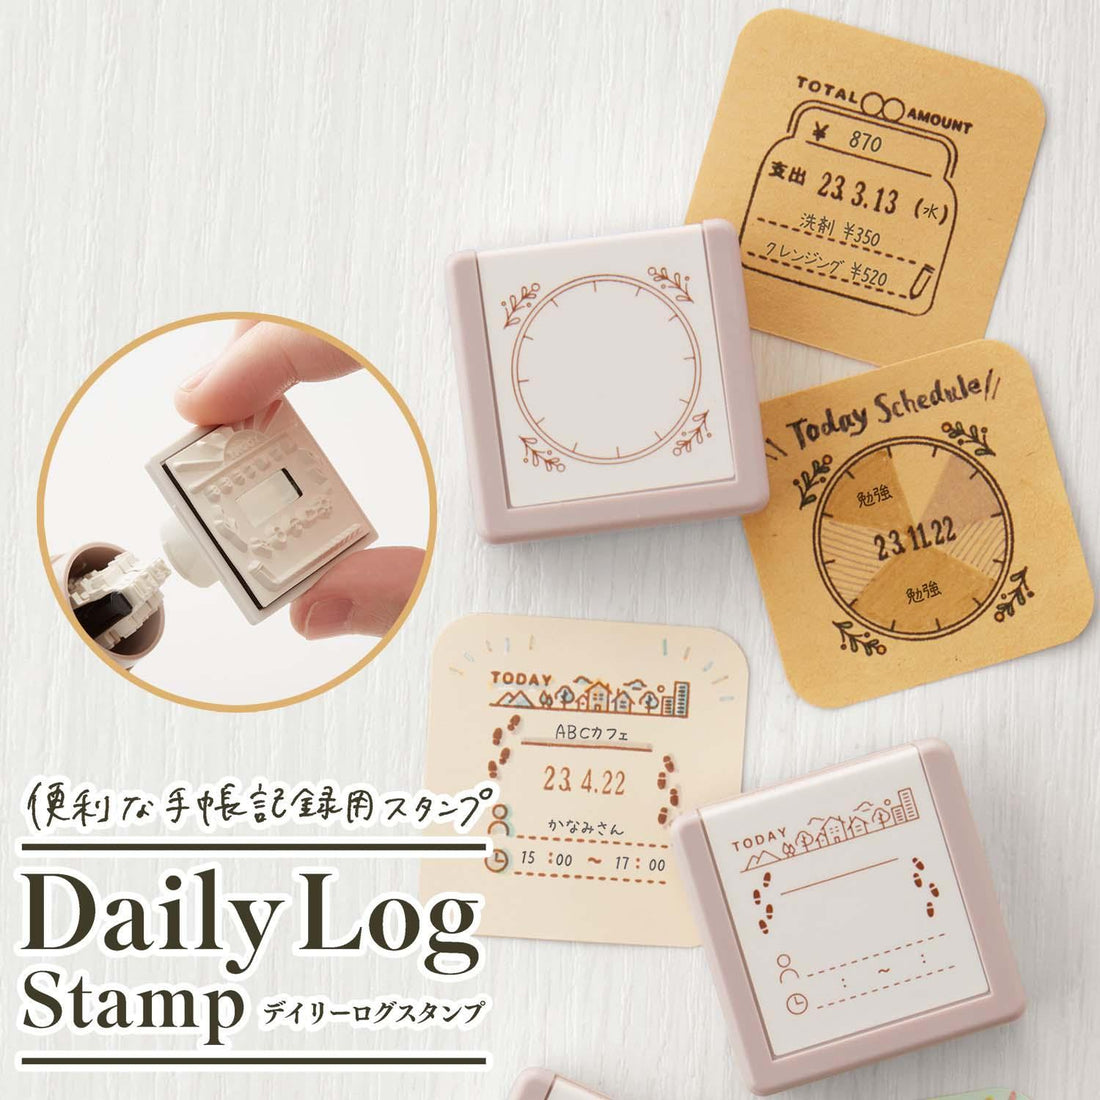 Daily Log Stamp - SNS Update Record - Techo Treats